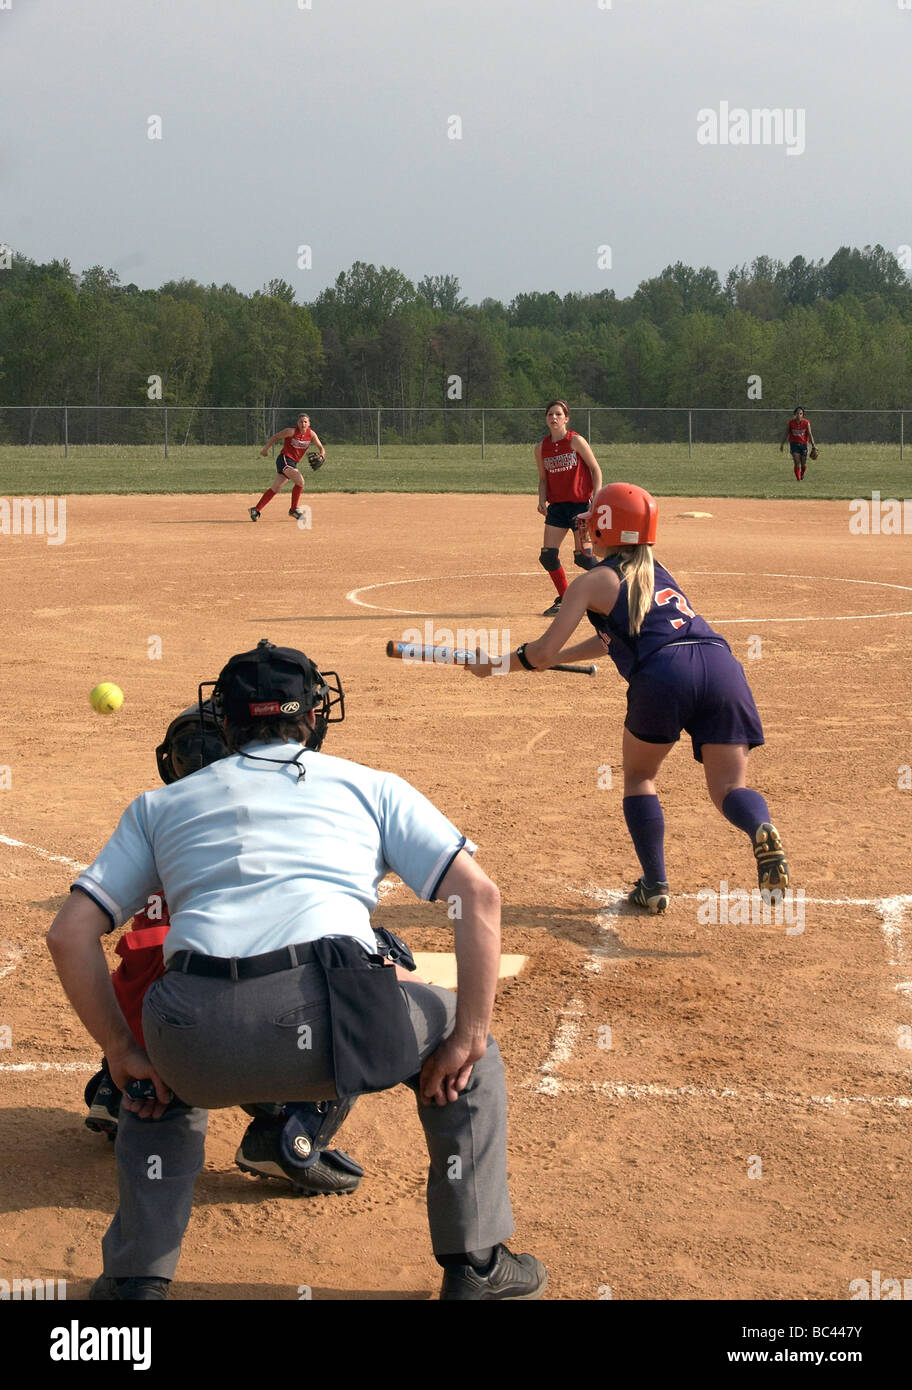 attempting to bunt the ball in High school softball Stock Photo